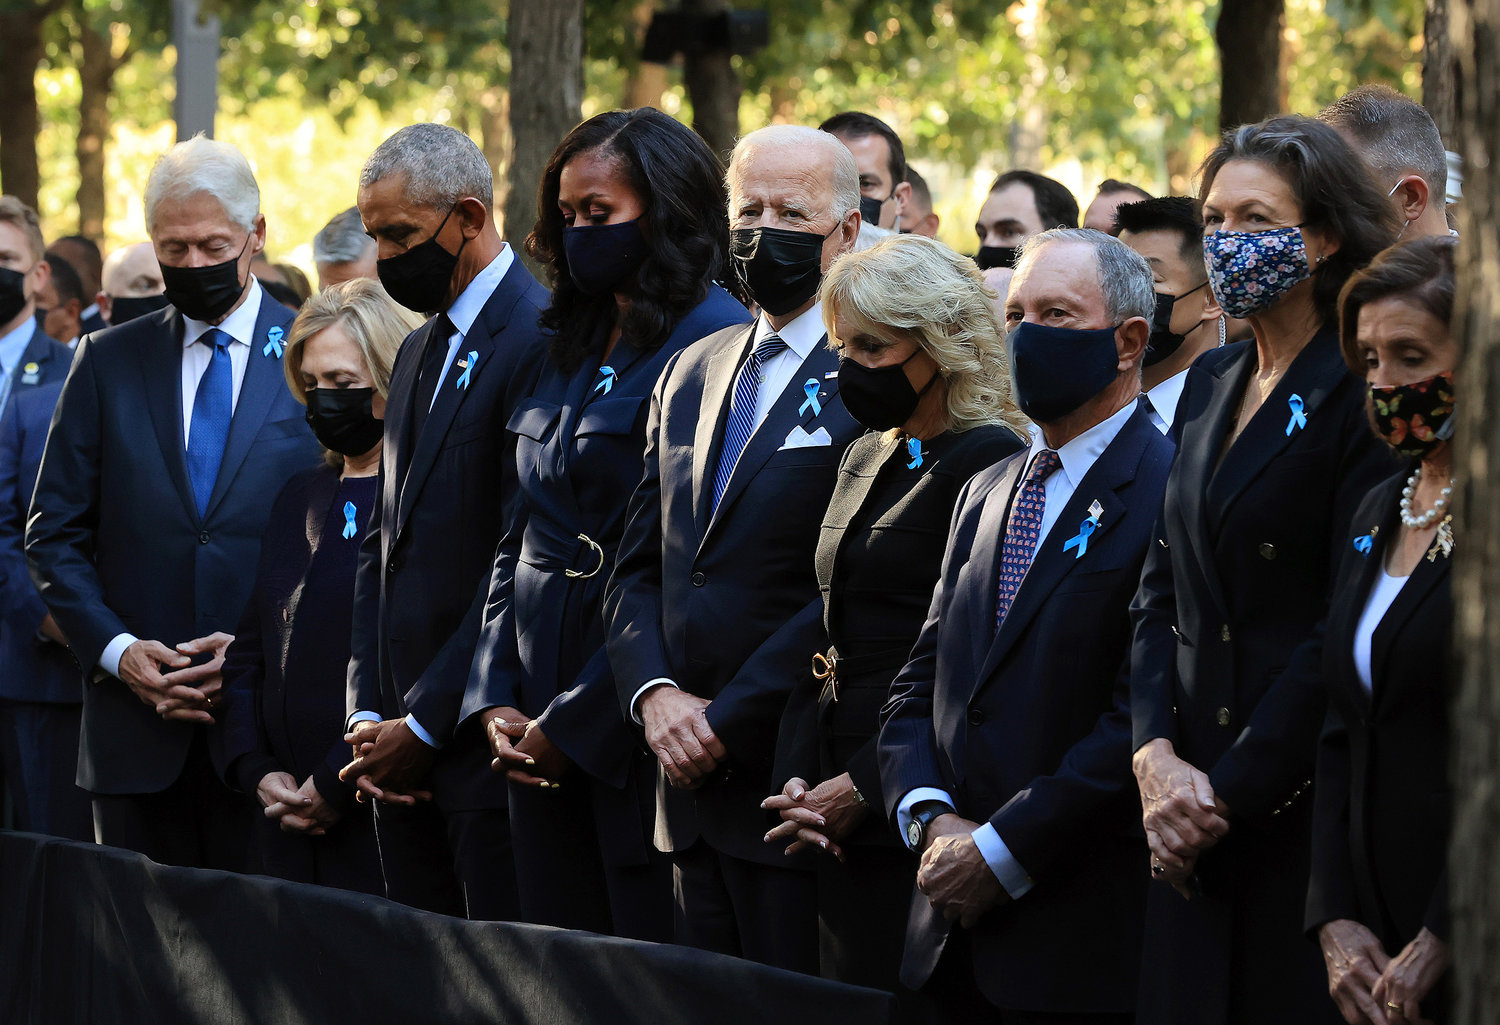 From left, former President Bill Clinton, former Secretary of State Hillary Clinton, former President Barack Obama, former first lady Michelle Obama, President Joe Biden, first lady Jill Biden, former New York City Mayor Michael Bloomberg, Bloomberg's partner Diana Taylor and Speaker of the House Nancy Pelosi (D-CA) participate in a moment of silence during the annual 9/11 Commemoration Ceremony at the National 9/11 Memorial and Museum on Saturday, Sept. 11, 2021, in New York City. (Chip Somodevilla/Getty Images/TNS)